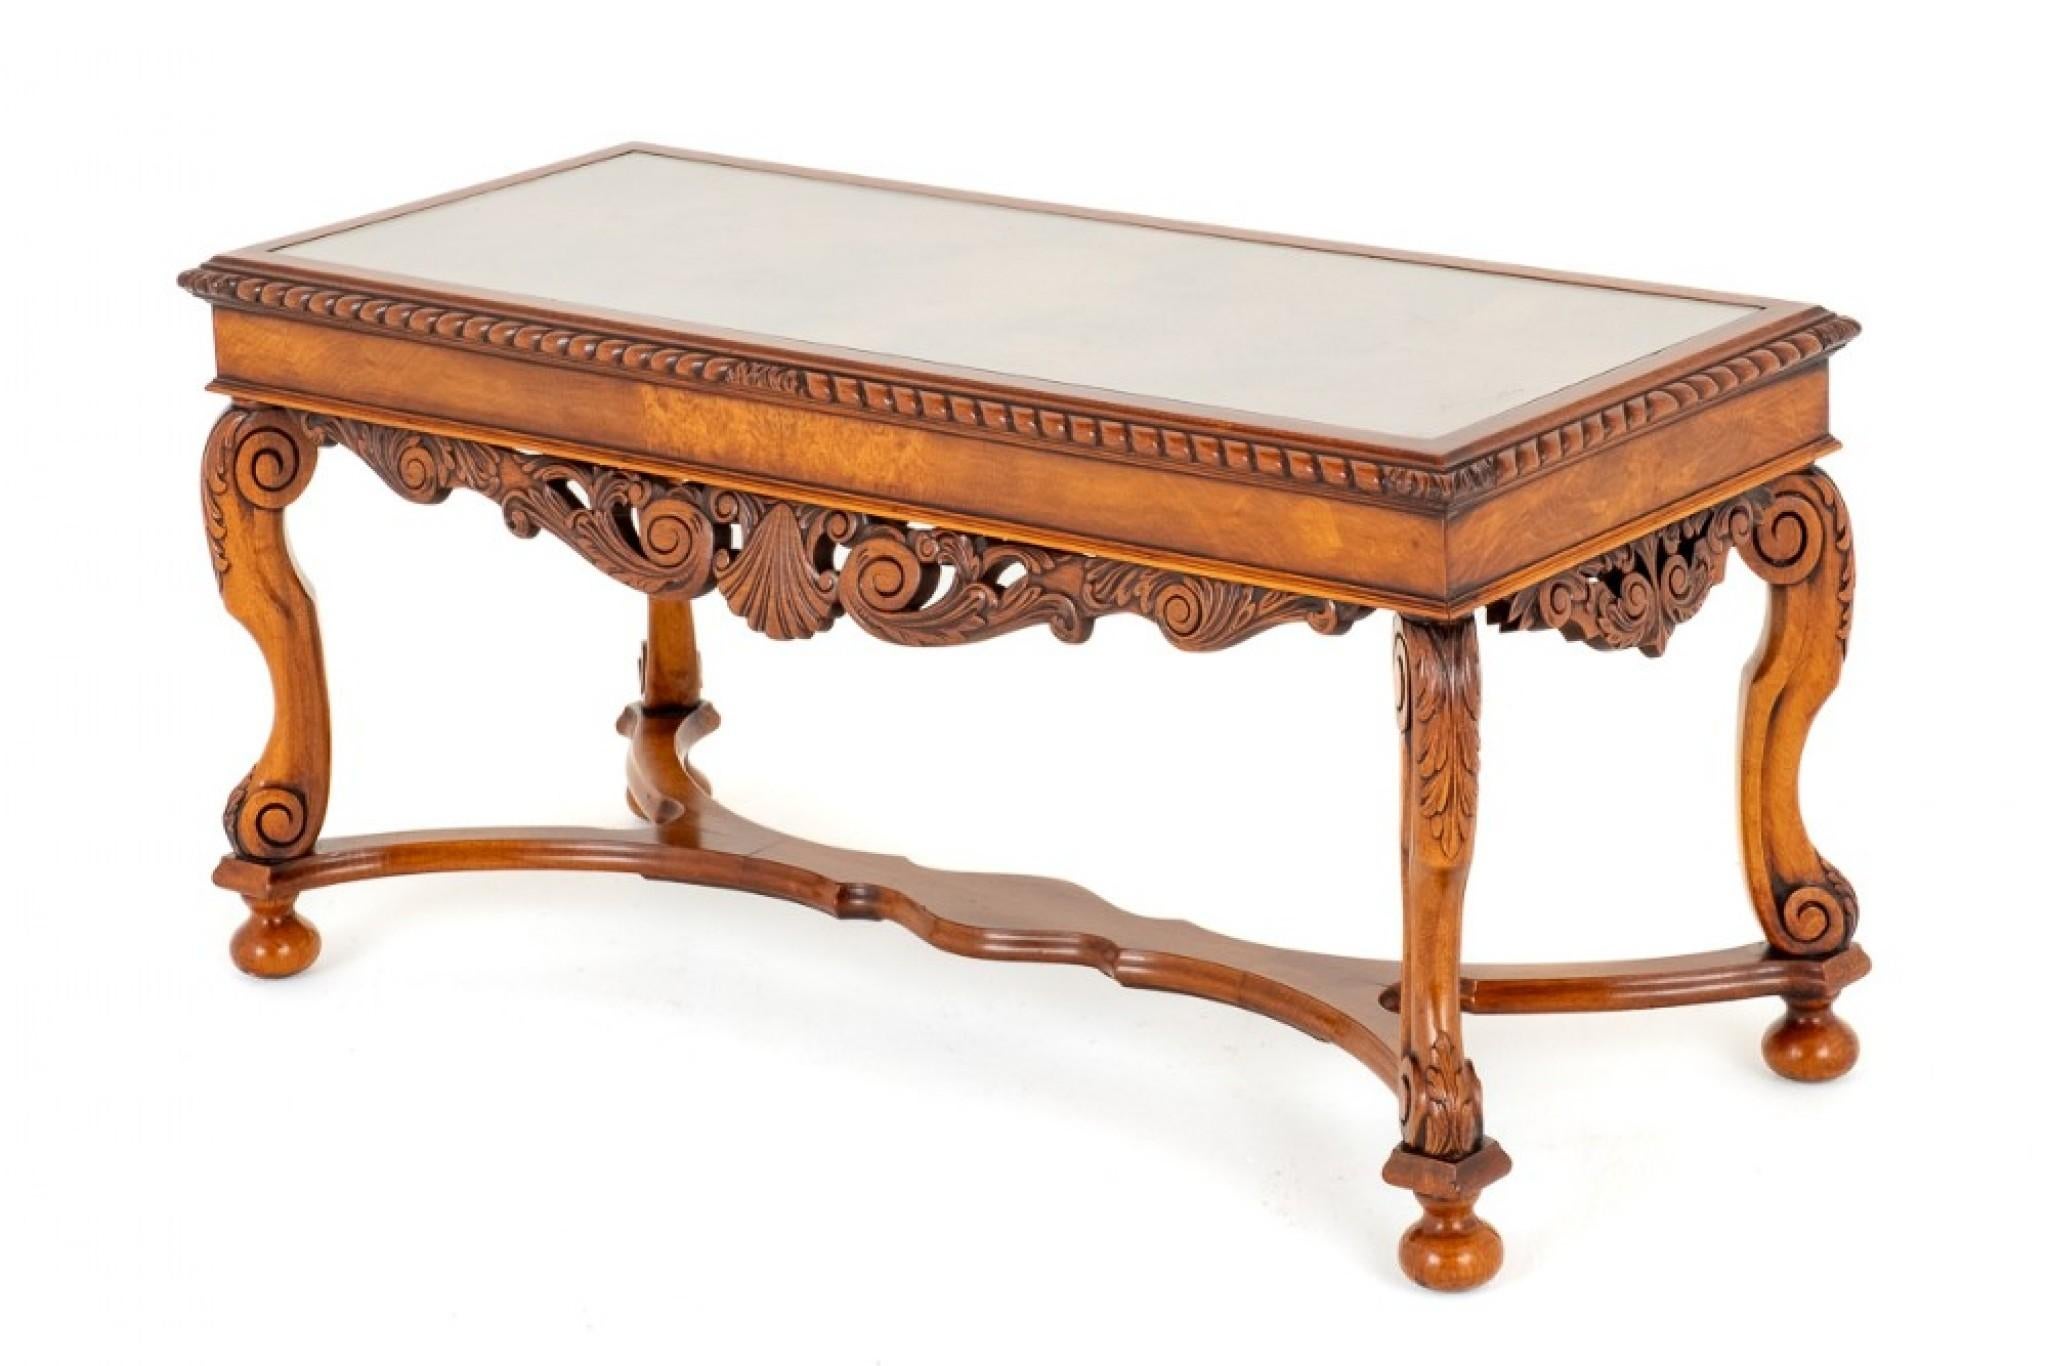 Superior Carolean Style Walnut Coffee Table.
Raised upon Typical Carolean Style Shaped and Carved Legs and a Shaped Stretcher.
Circa 1930
The Table Features a Shaped and Carved Frieze.
The Top of the Table Having Book Matched Burr walnut Veneers and